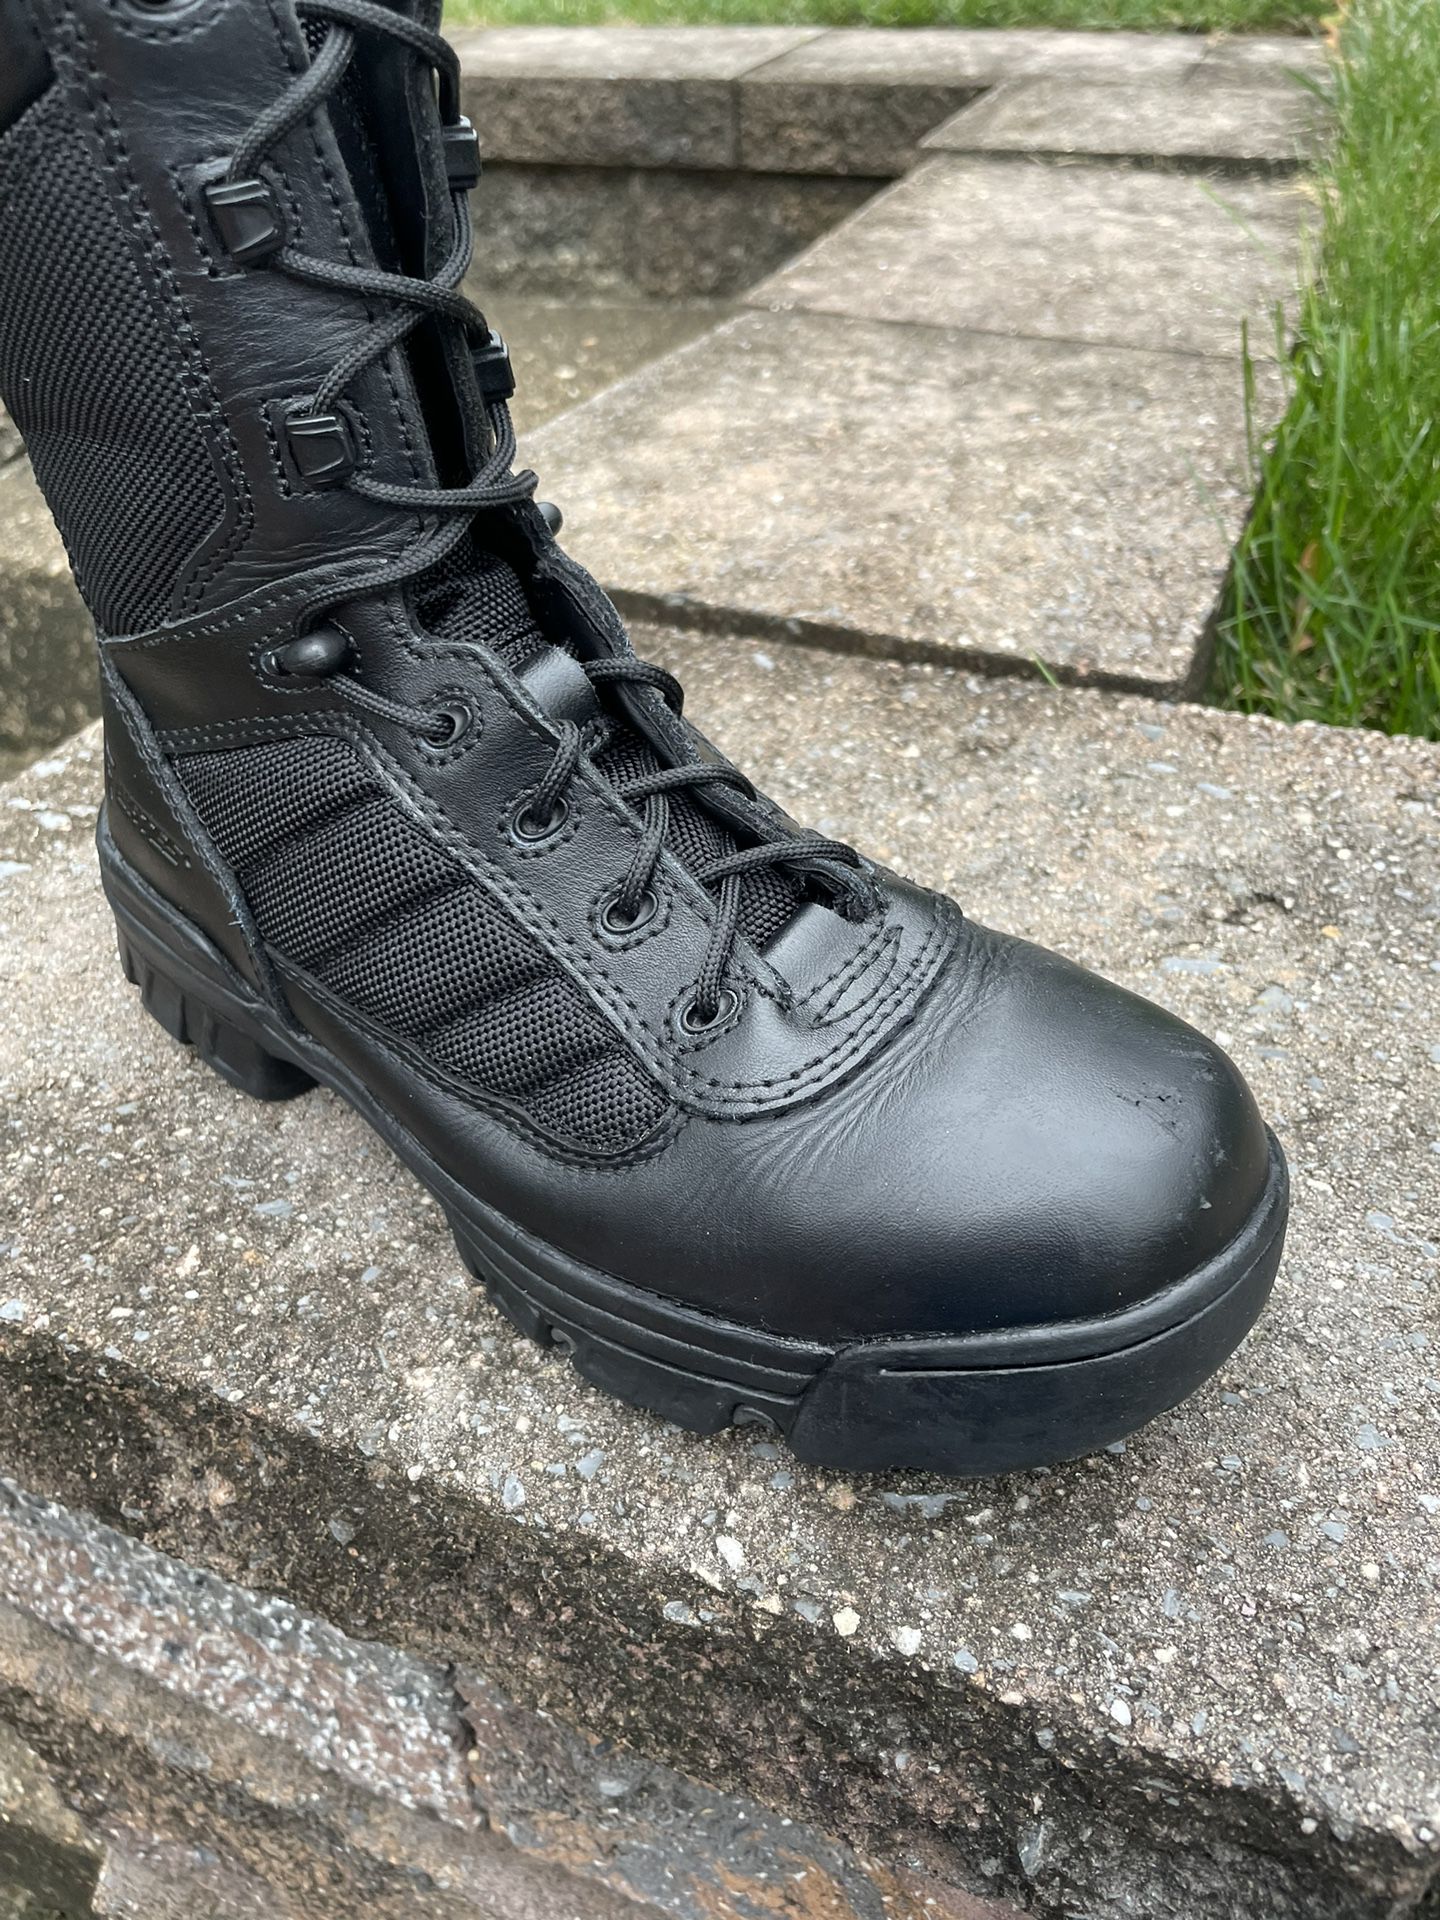 Bates Men's 8" Ultralite Tactical Sport Military Boot size 6